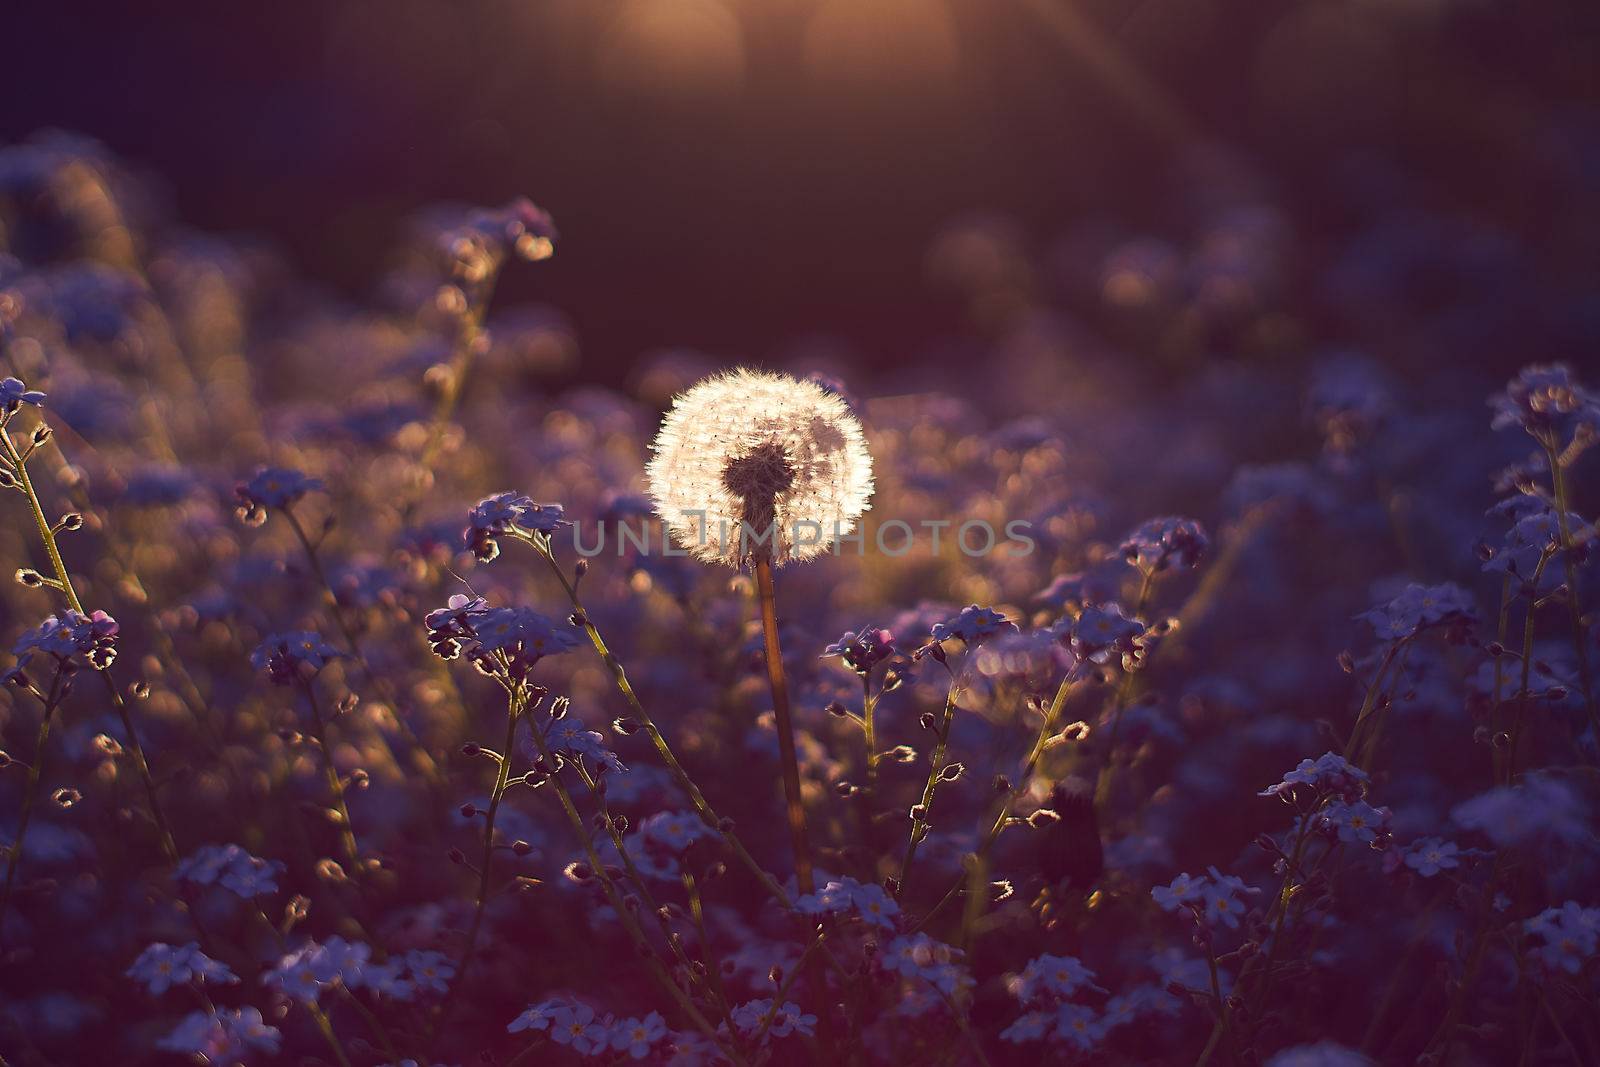 Dandelion and Forgetmenot by Sirius3001